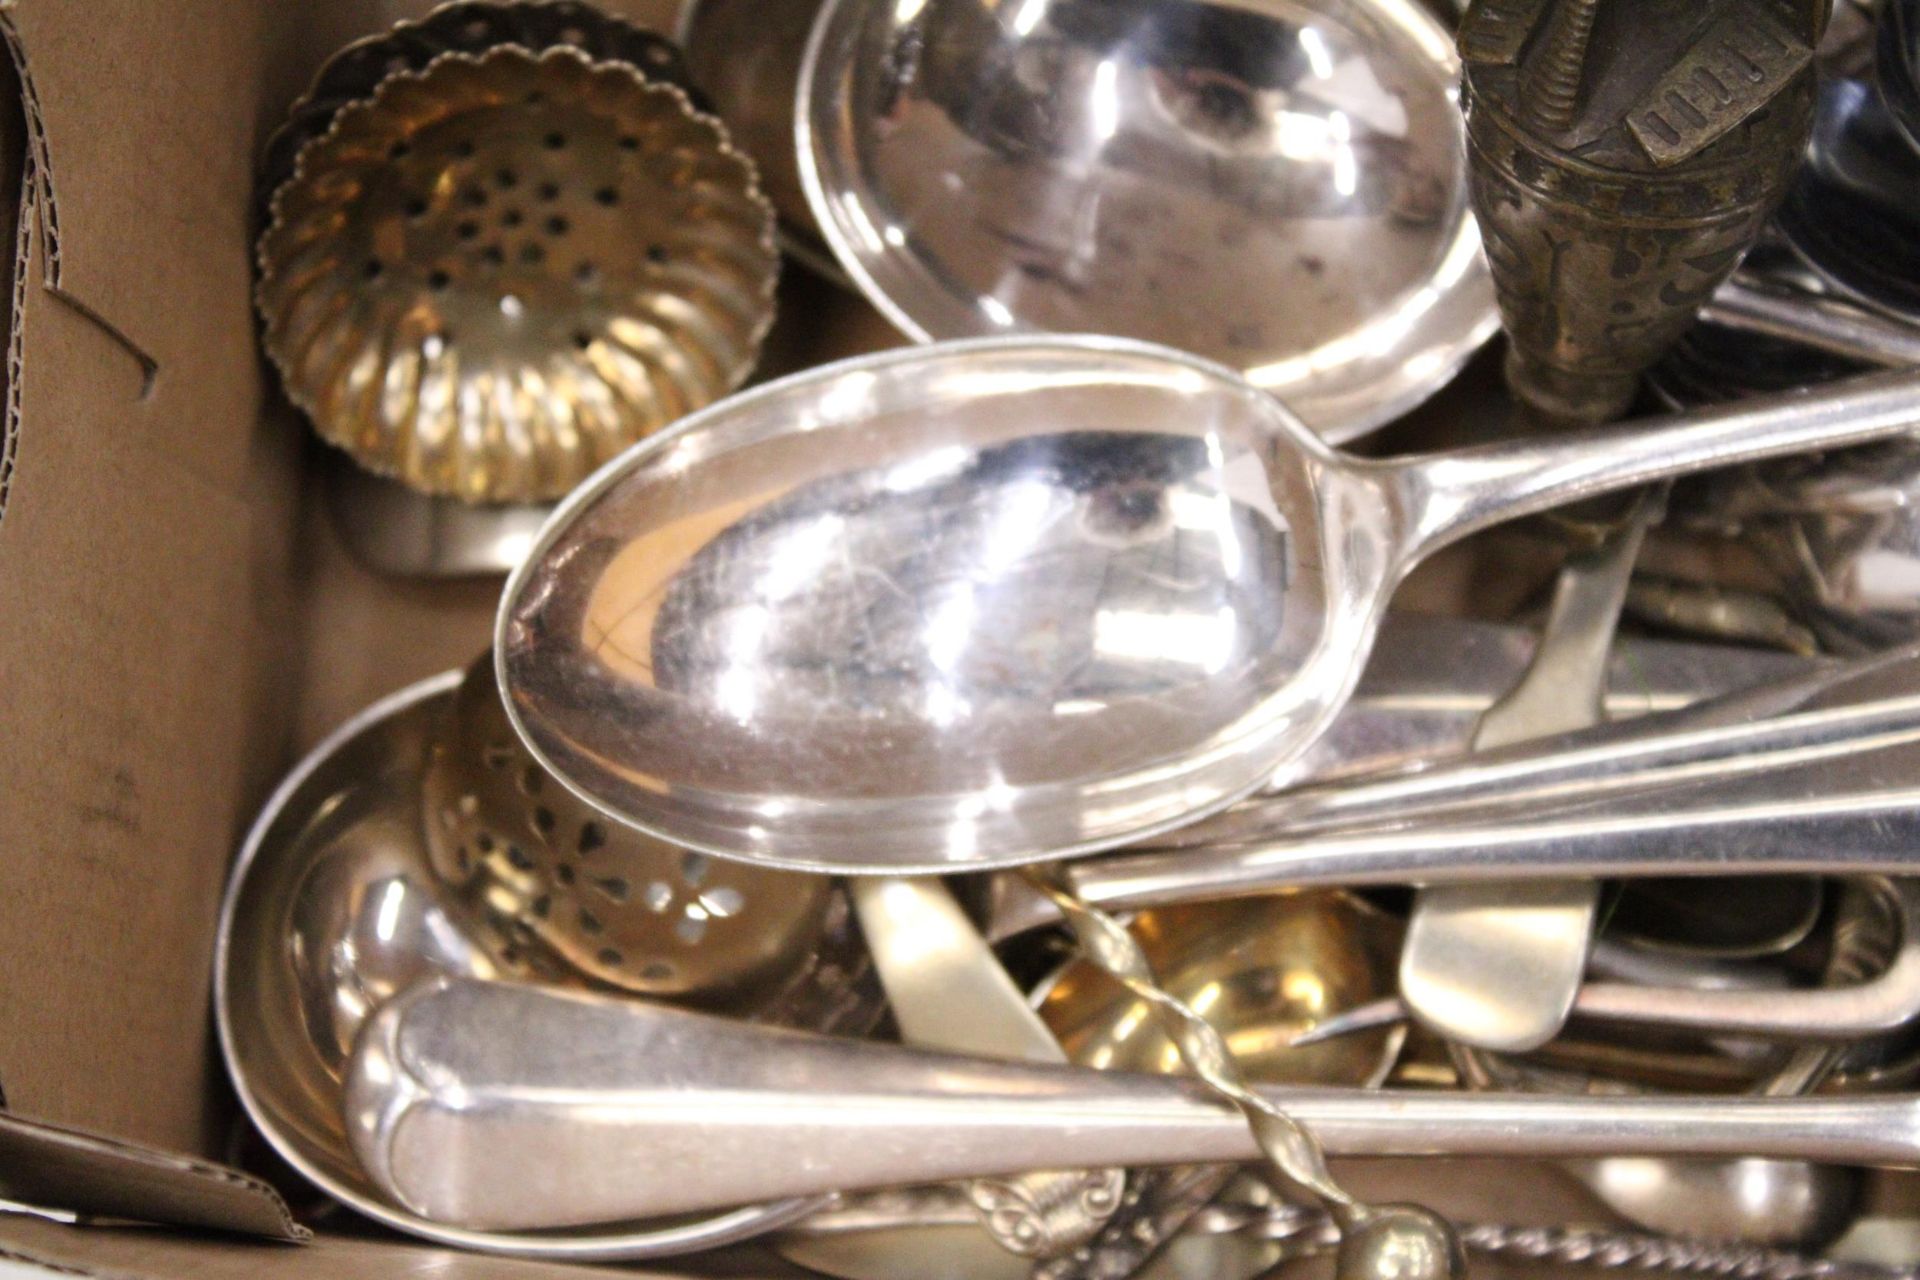 A QUANTITY OF VINTAGE FLATWARE TO INCLUDE LADELS, MUFFIN FORK, SUGAR SIFTERS, SPOONS, ETC - Image 5 of 5